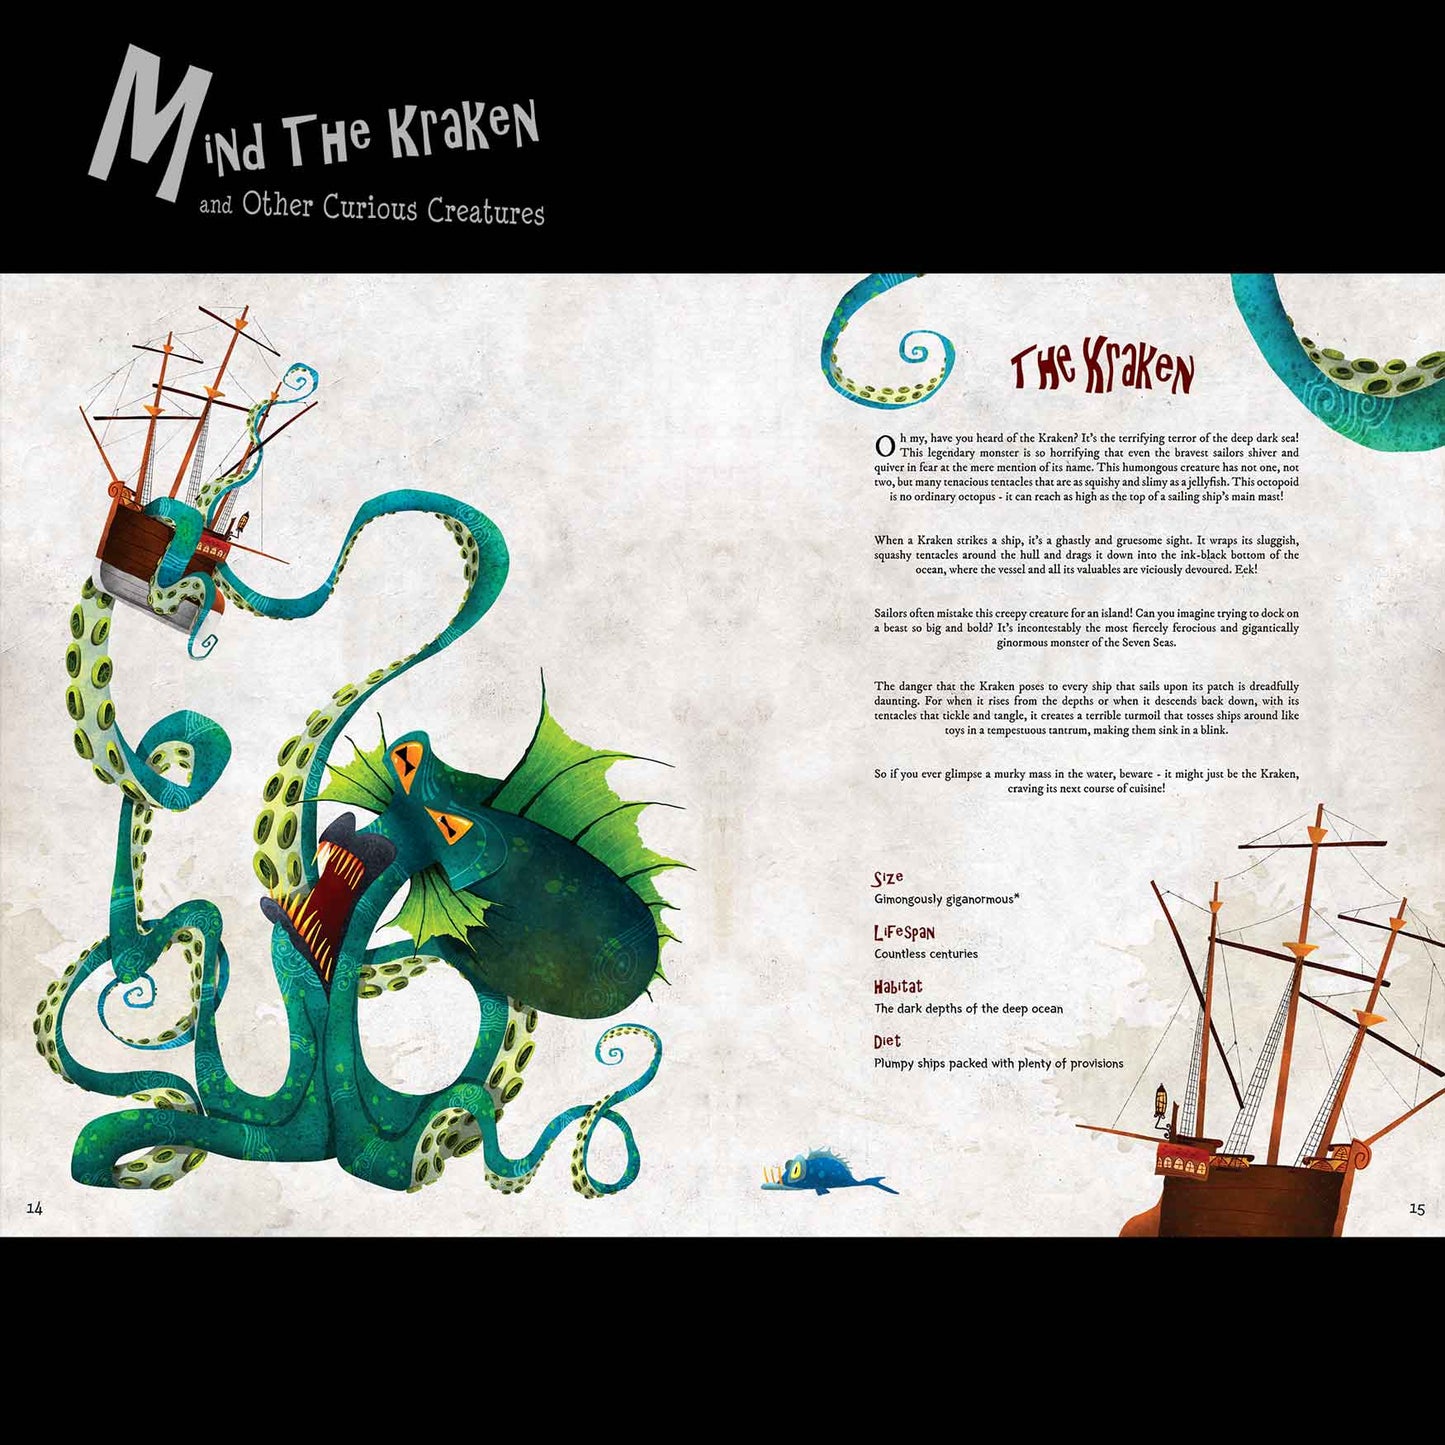 Mind The Kraken and other Curious Creatures